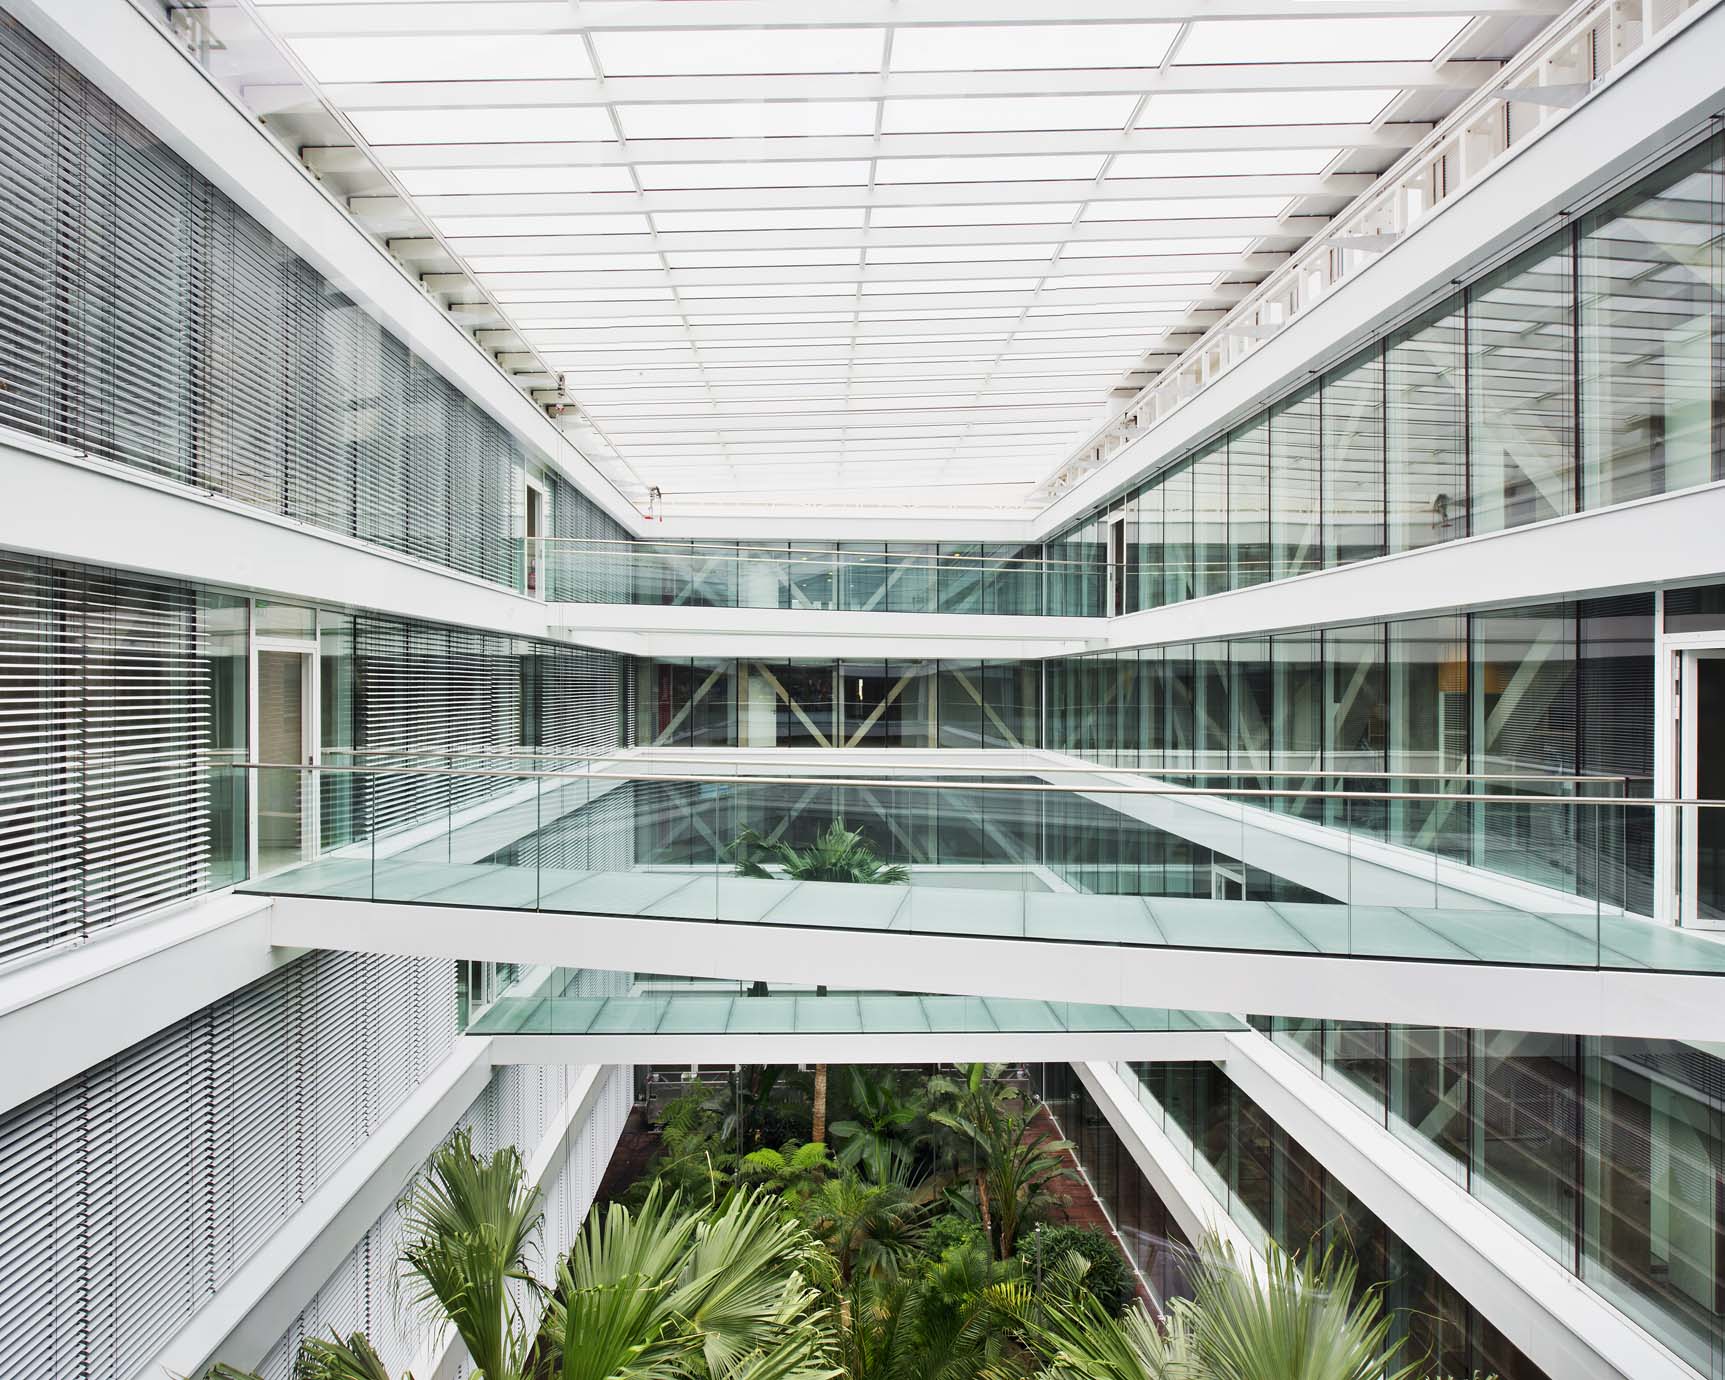 For the INPI headquarters in Courbevoie, France, a verdant garden courtyard forms the ecological heart of this biophilic and net positive energy building.